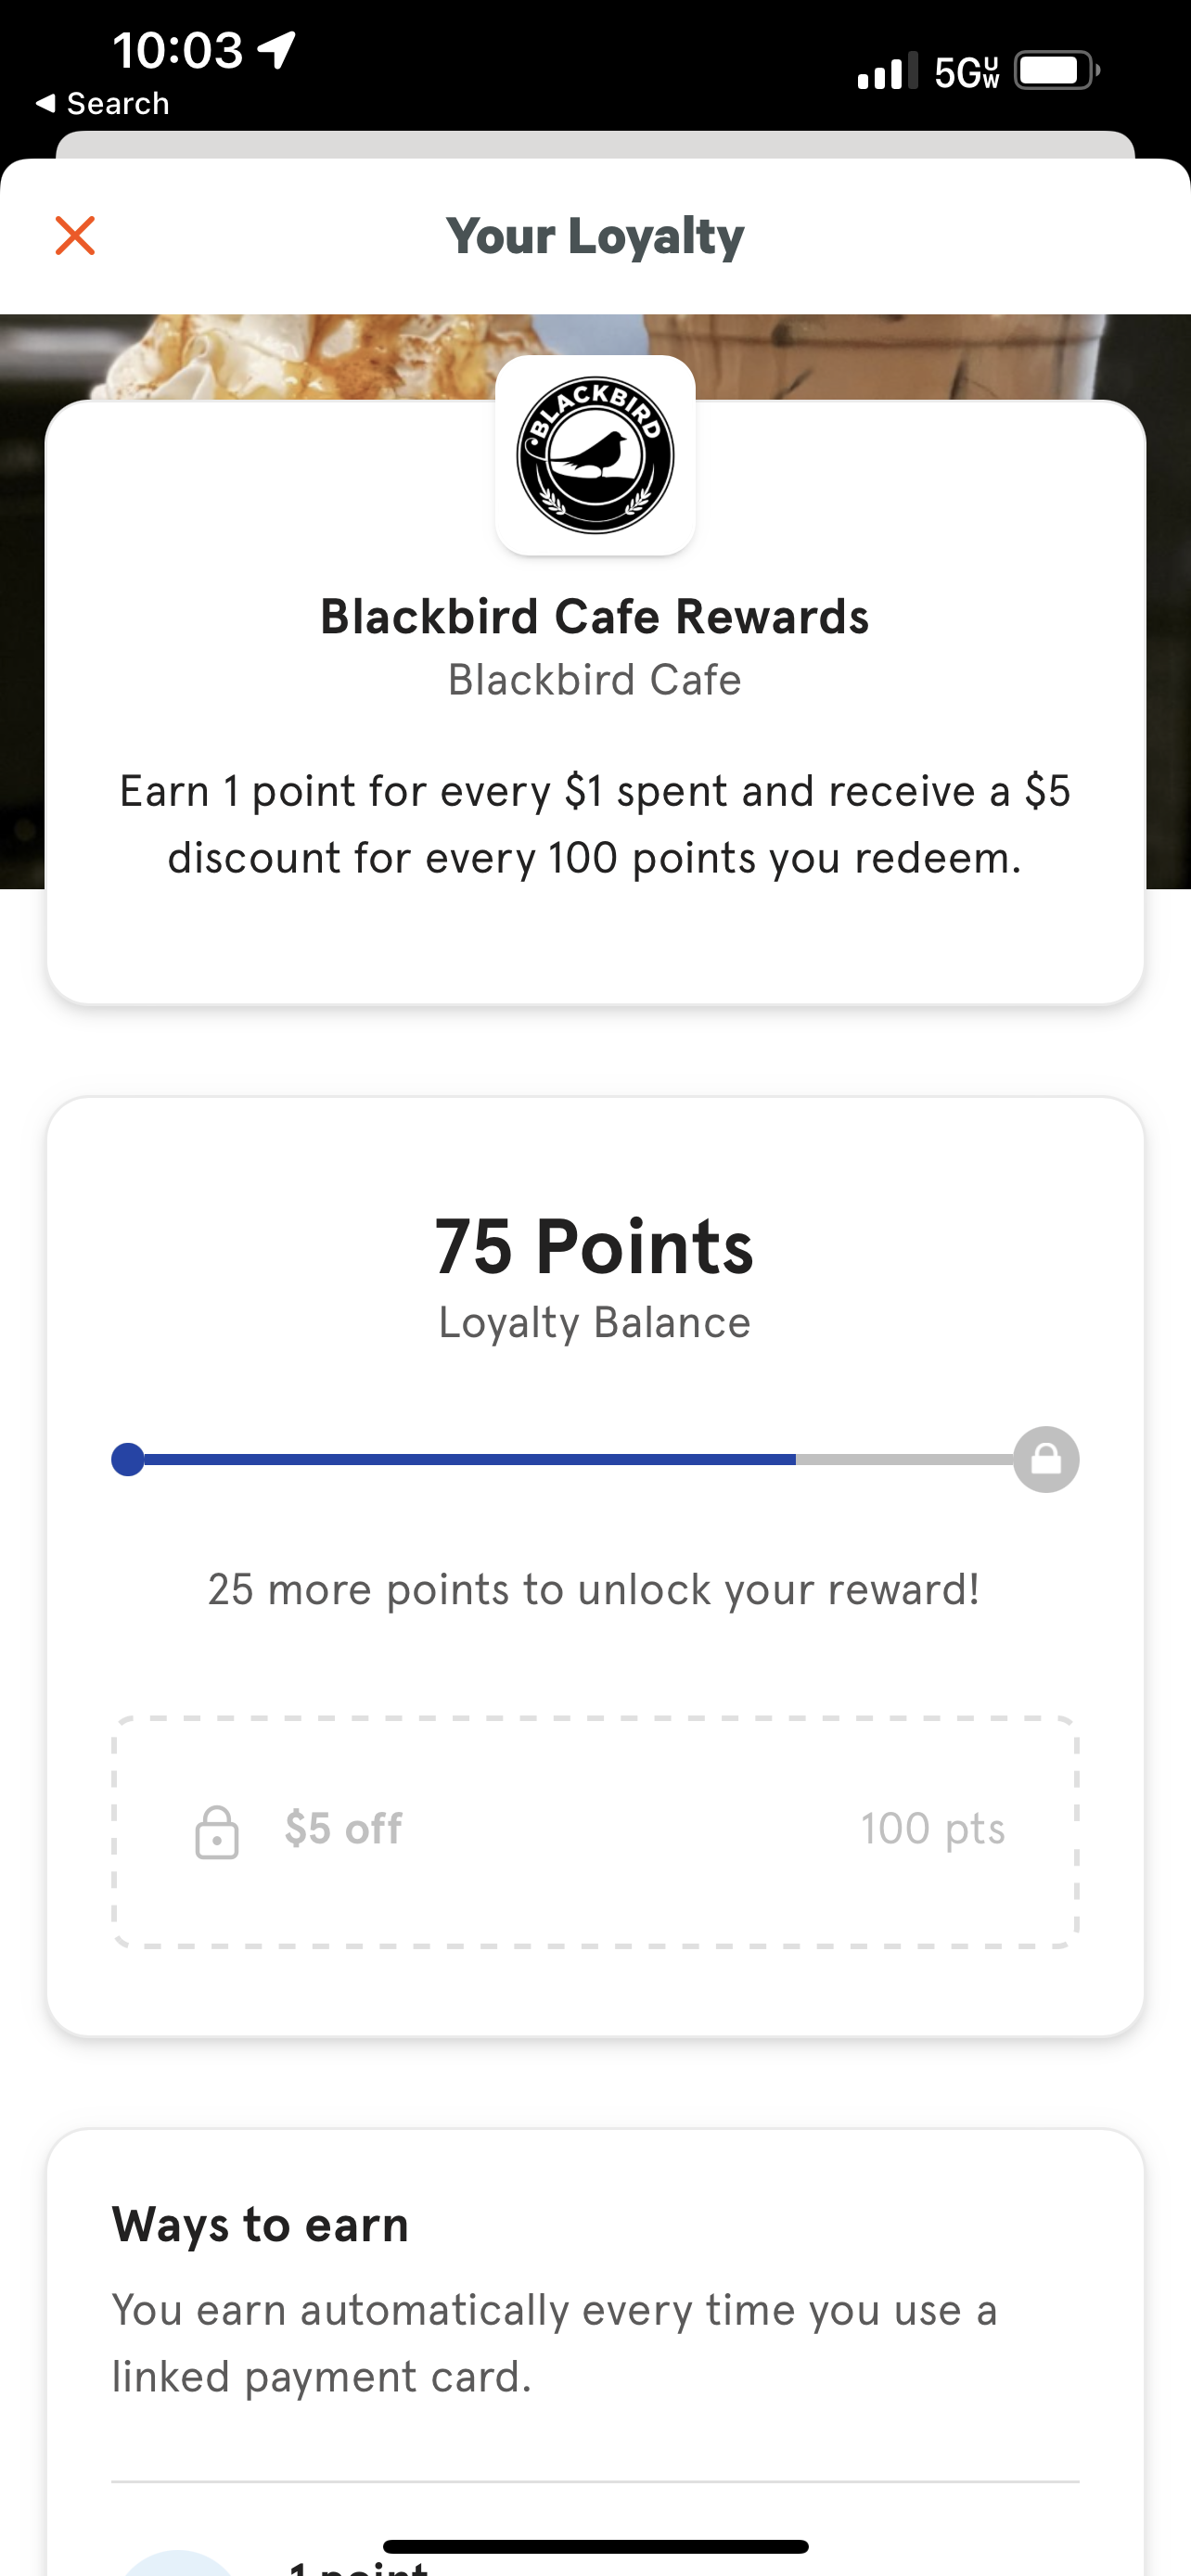 iPhone screenshot of the "Your Loyalty" page in the Toast TakeOut app showing Blackbird Cafe Rewards. The text reads, "Earn 1 point for every $1 spent and receive a $5 discount for every 100 points you redeem." The user who took the screenshot currently has a Toast Loyalty balance of 75 points.